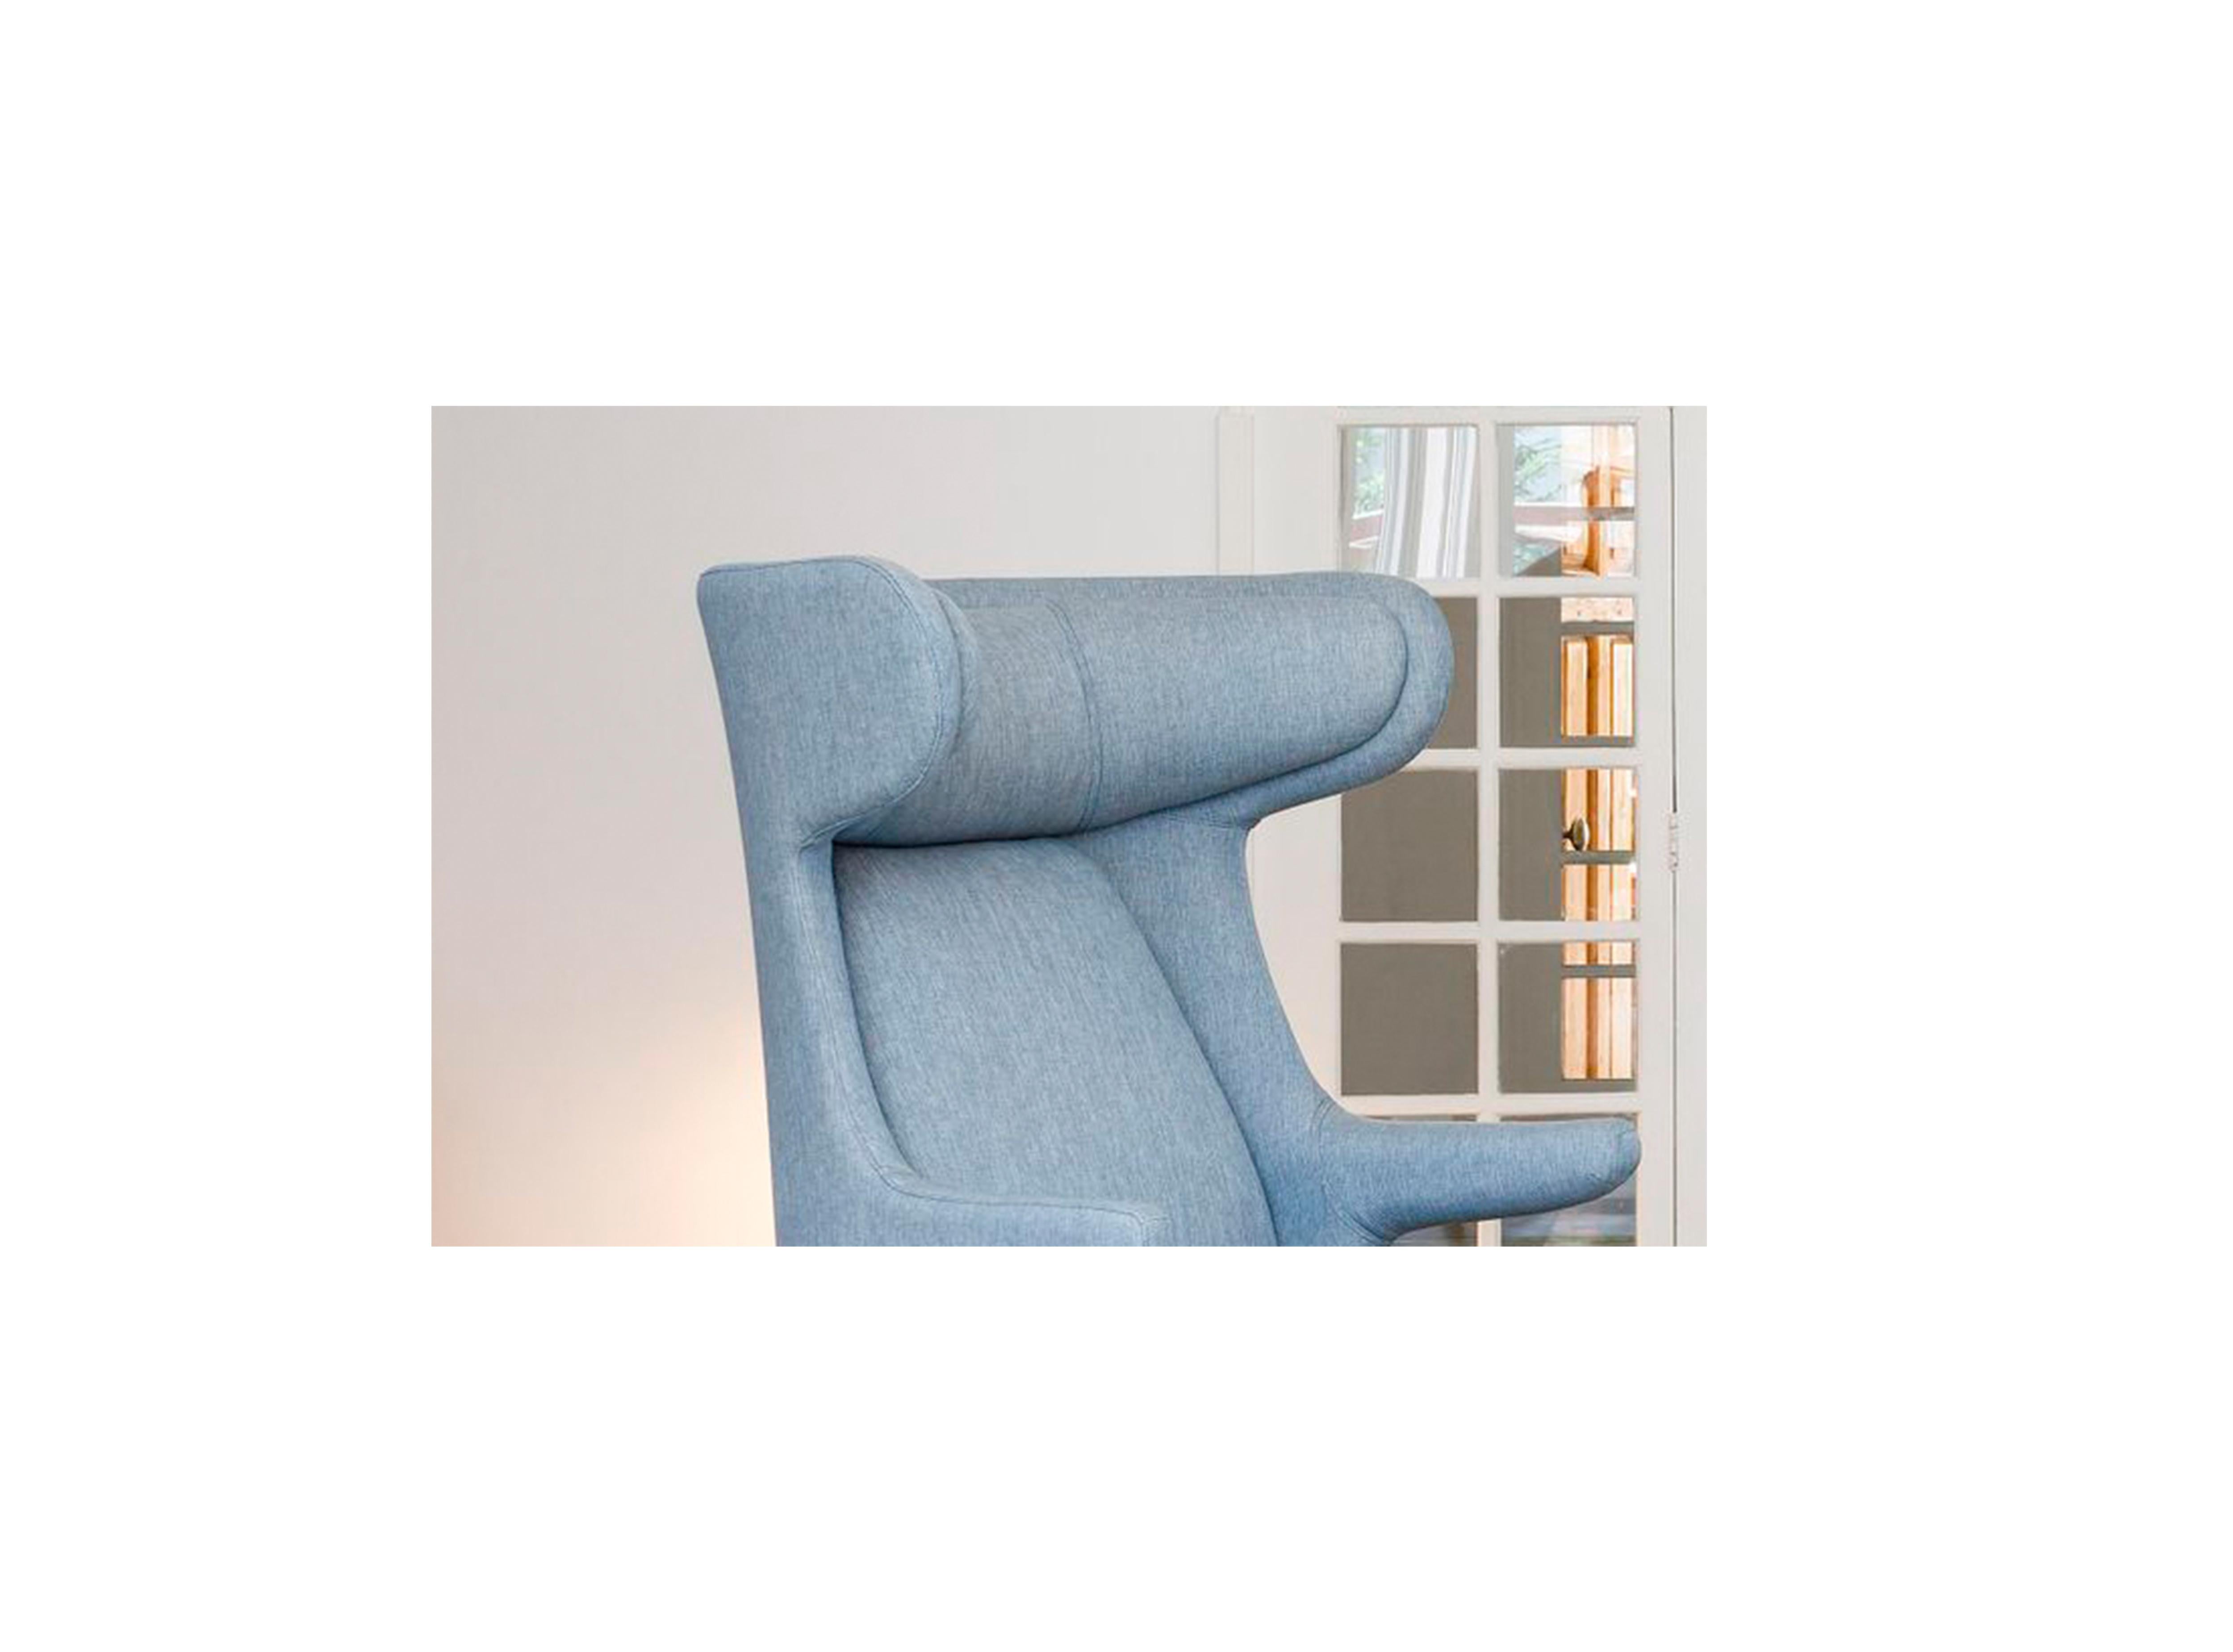 Modern Jaime Hayon, Contemporary, Monocolor in Blue Fabric Upholstery Dino Armchair For Sale